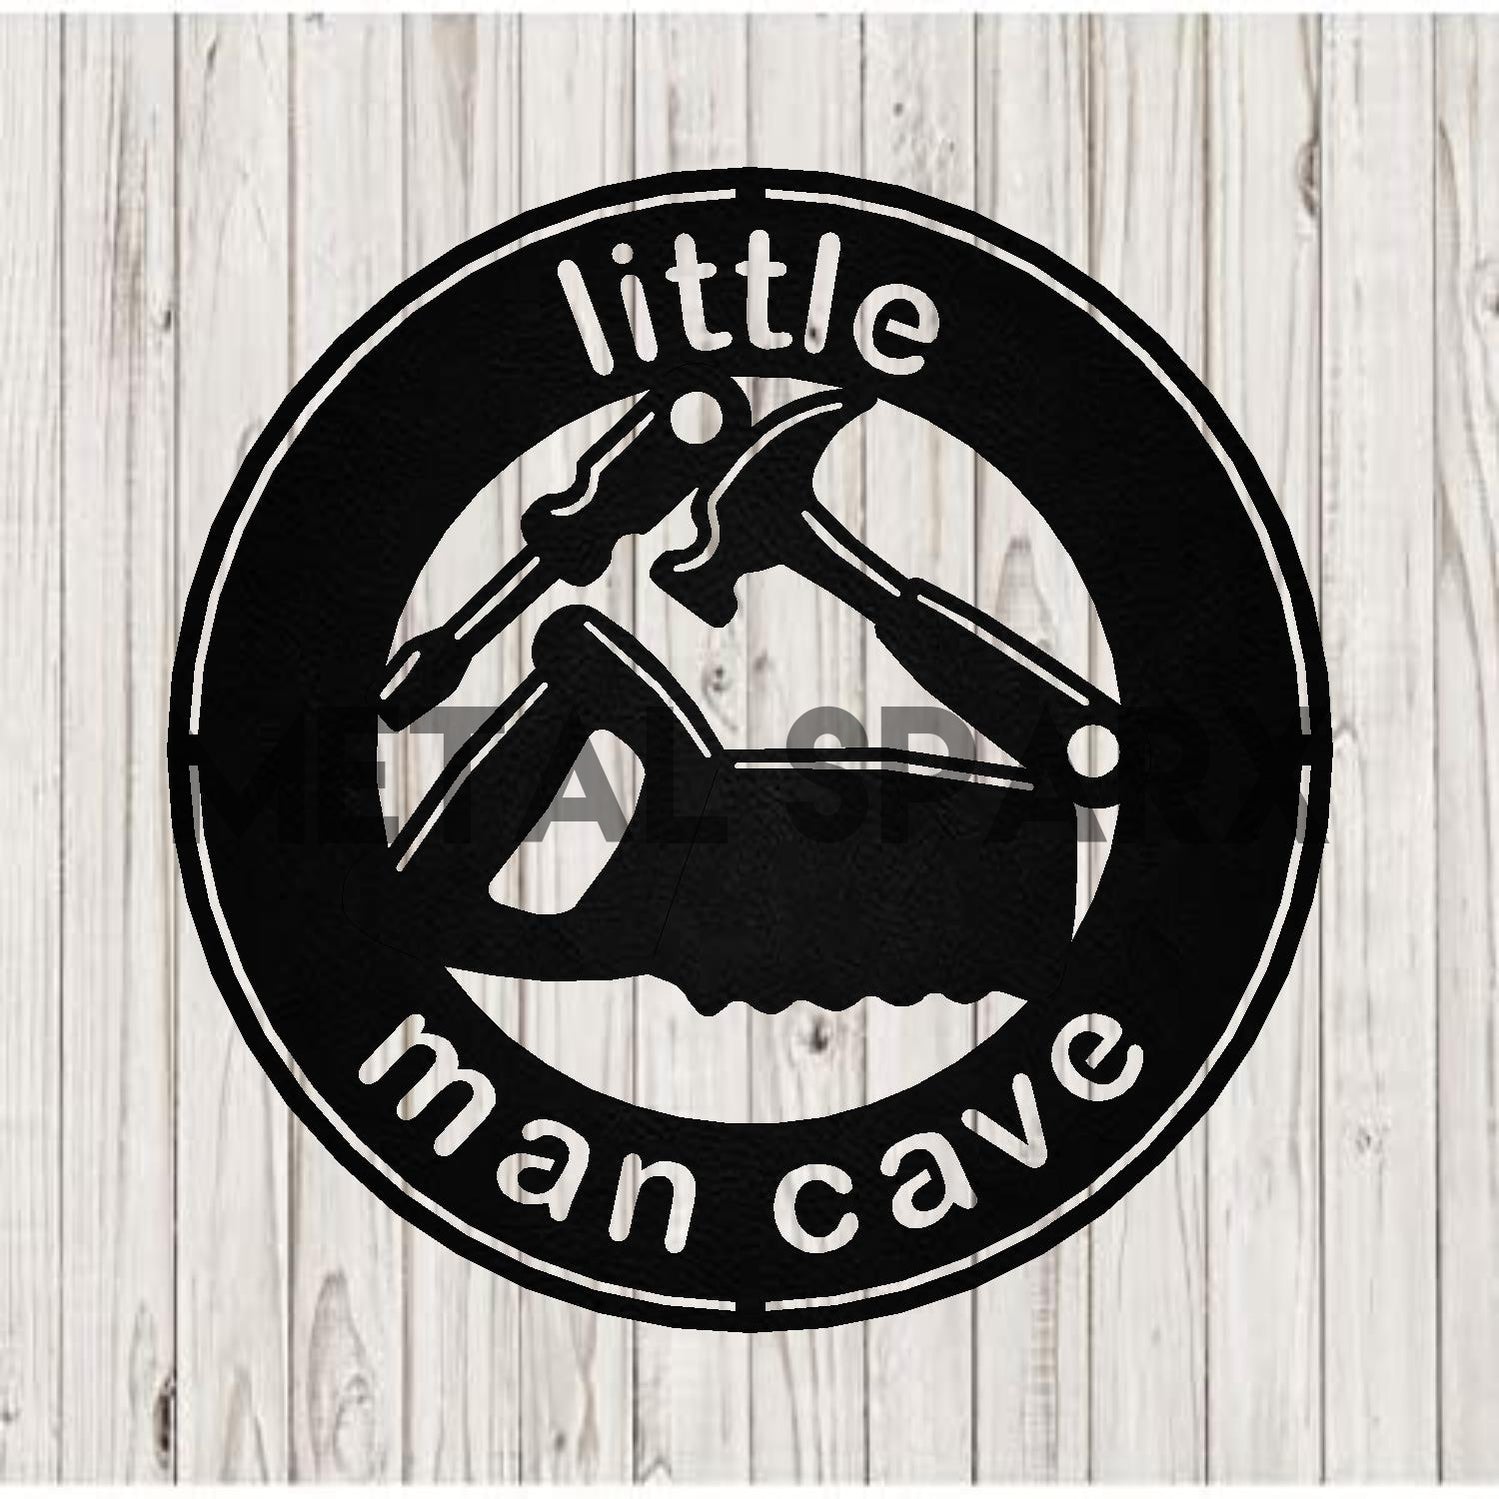 Little Man Cave Tools